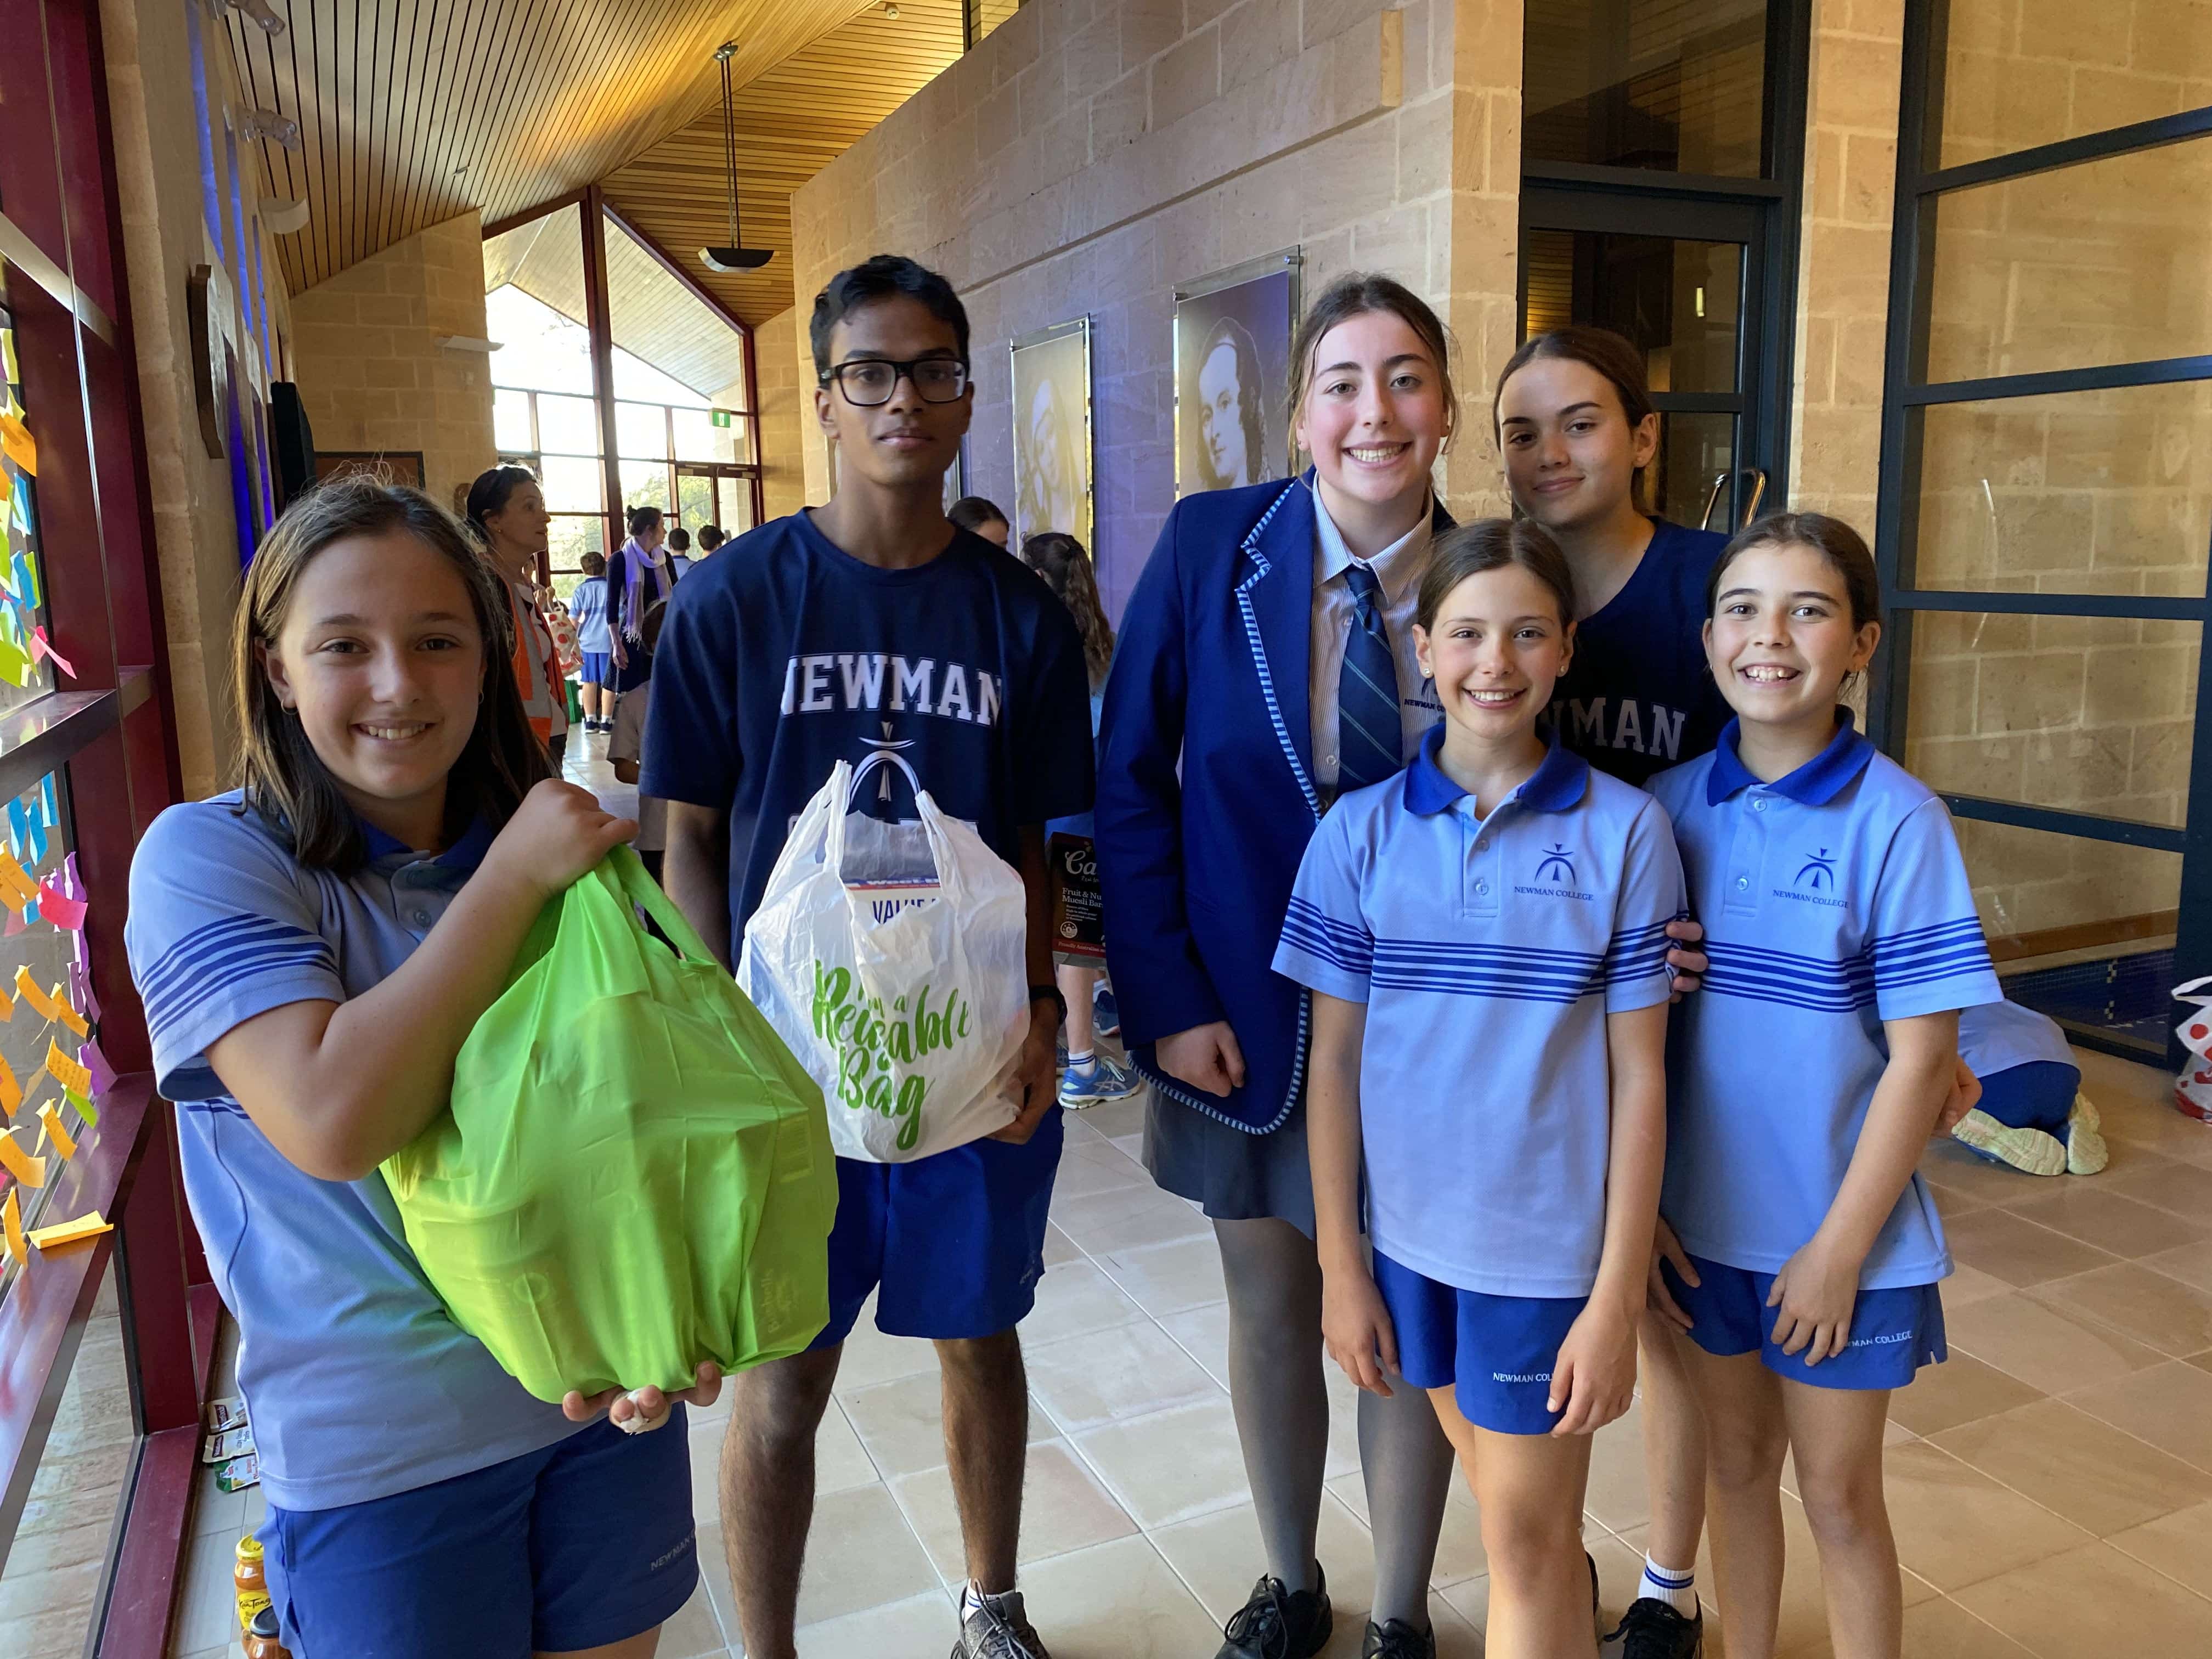 Newman News Term 3 Week 6: From the Leader of Mission and Catholic Identity